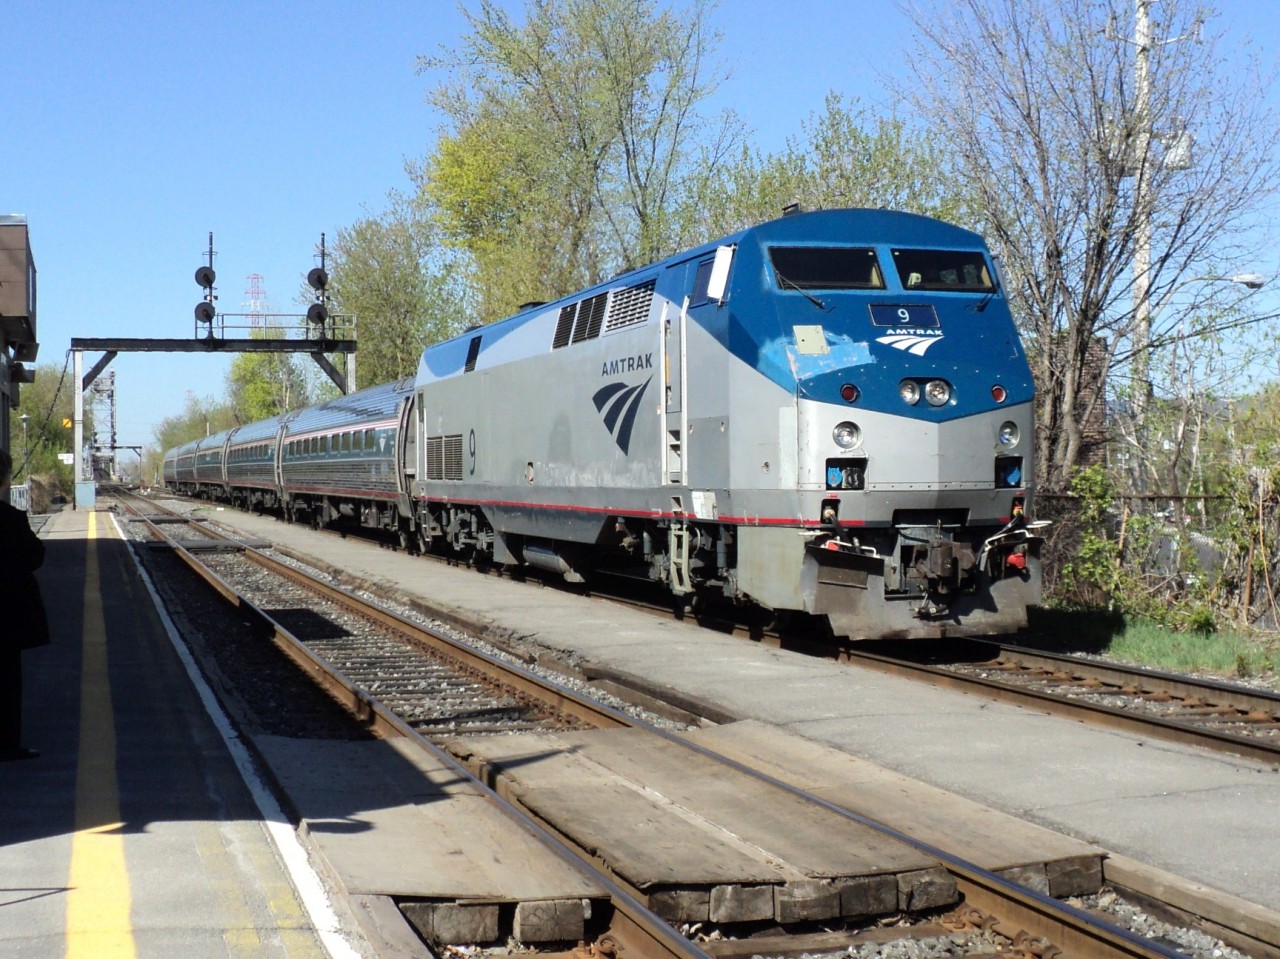 AMTRAK loco 9 P-42-DC with front modification not finish going to Albany New York where they change crew and change loco and  keep on going to NEW YORK on rte 68 Adironddack